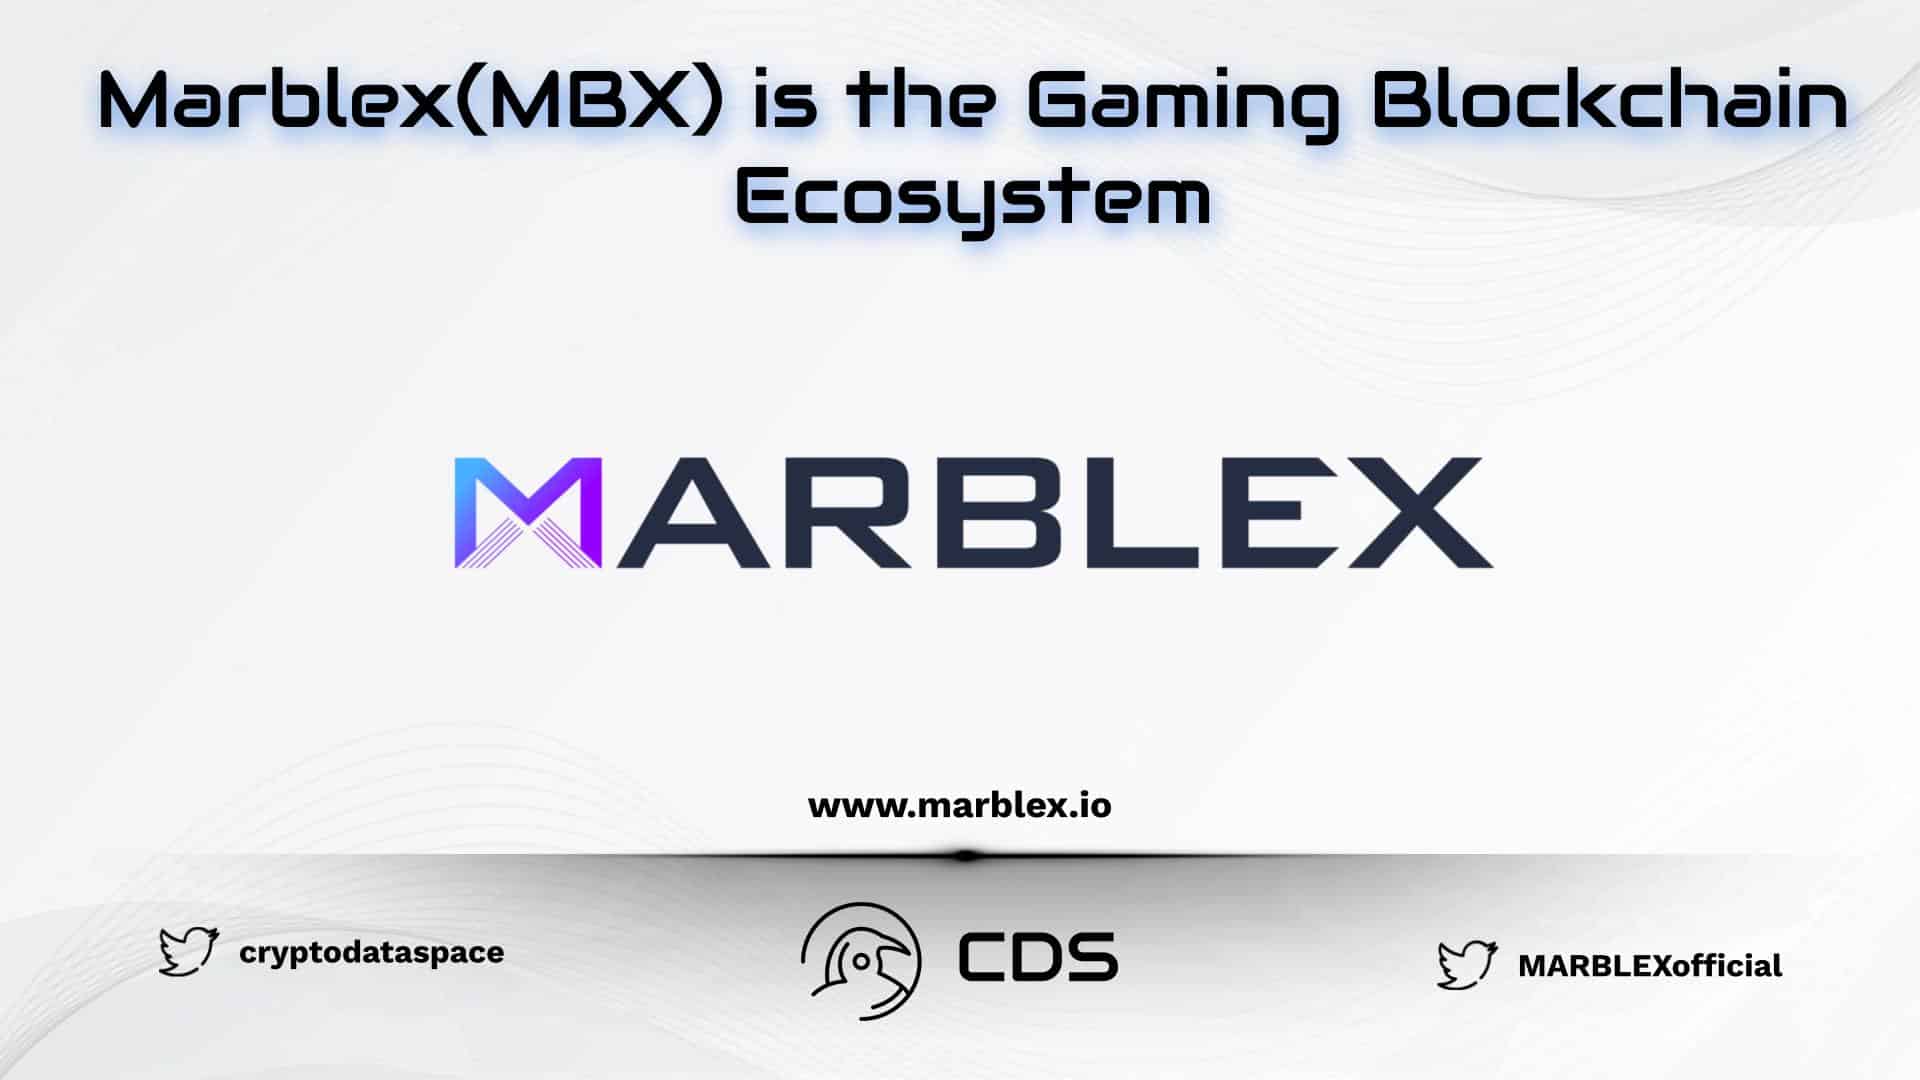 Marblex(MBX) is the Gaming Blockchain Ecosystem